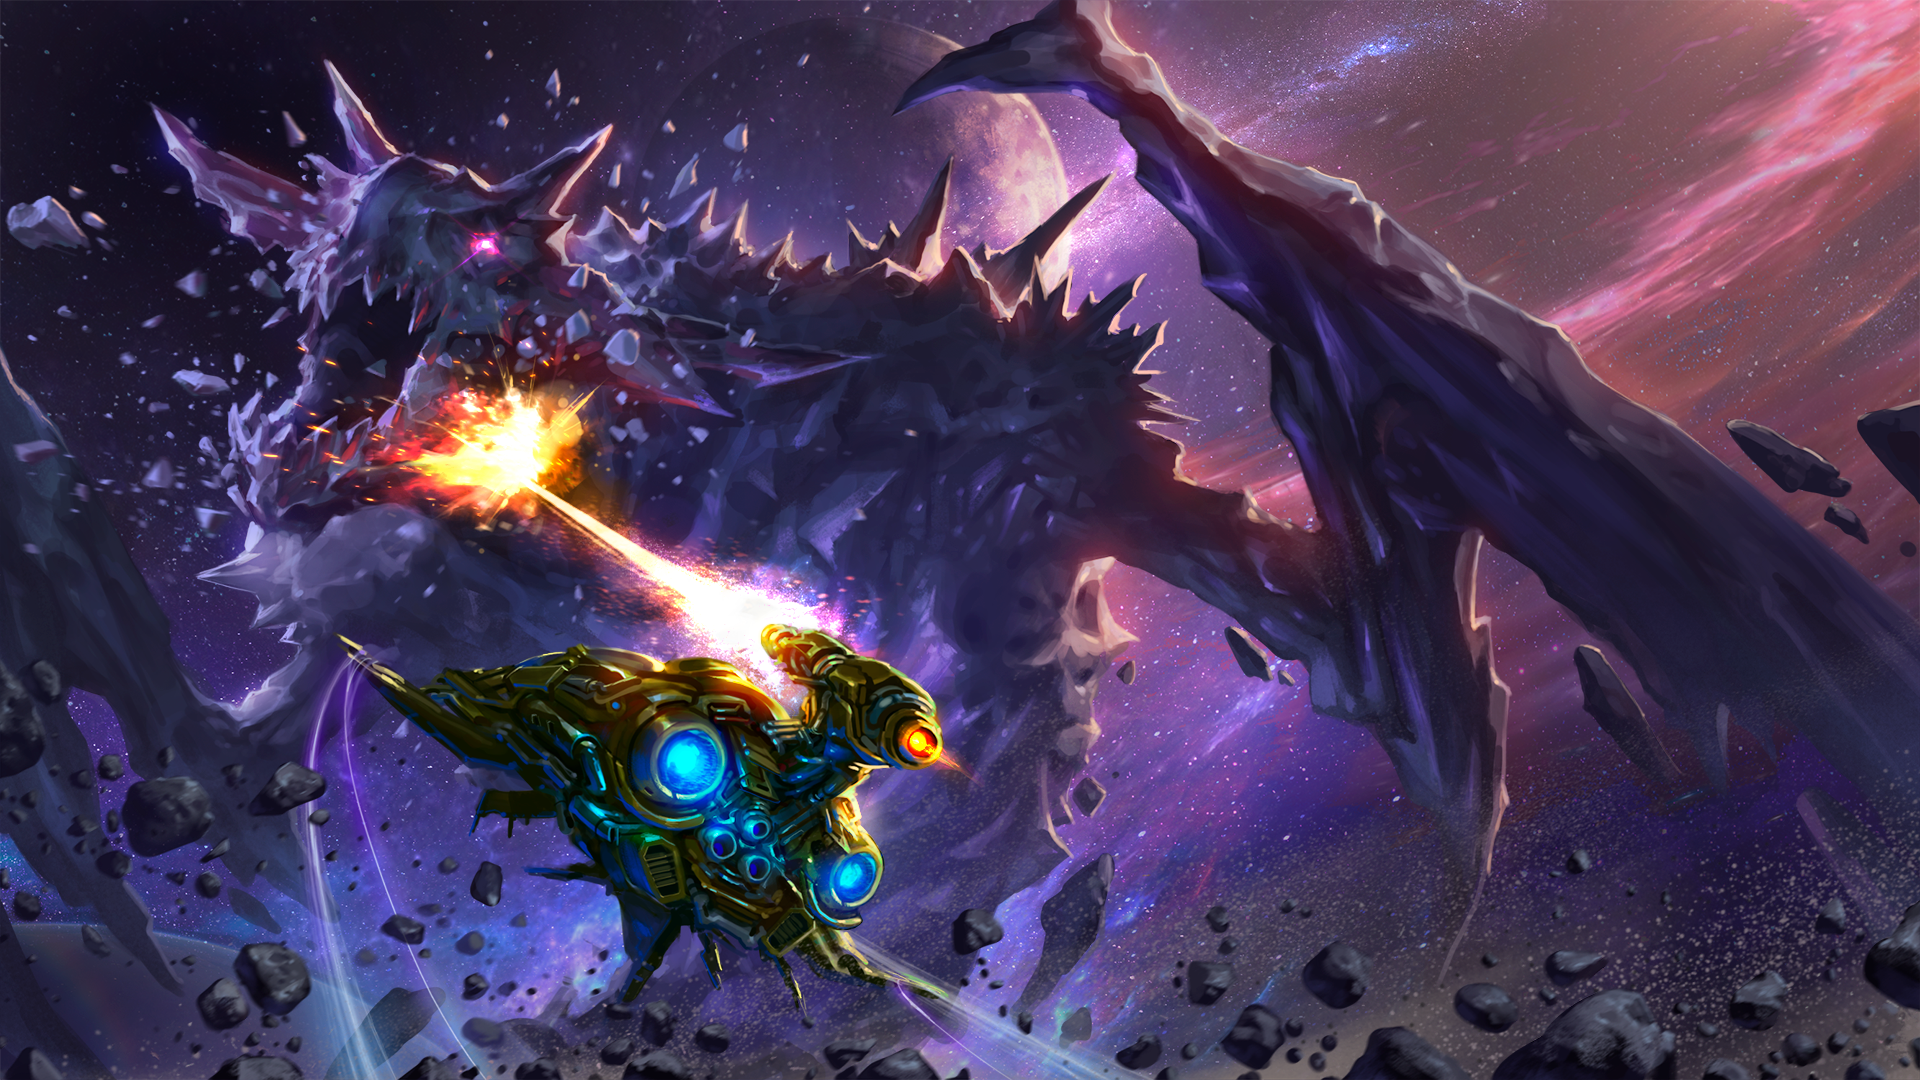 A ship fires upon a large dragon-like alien with rocky skin in the depths of space 